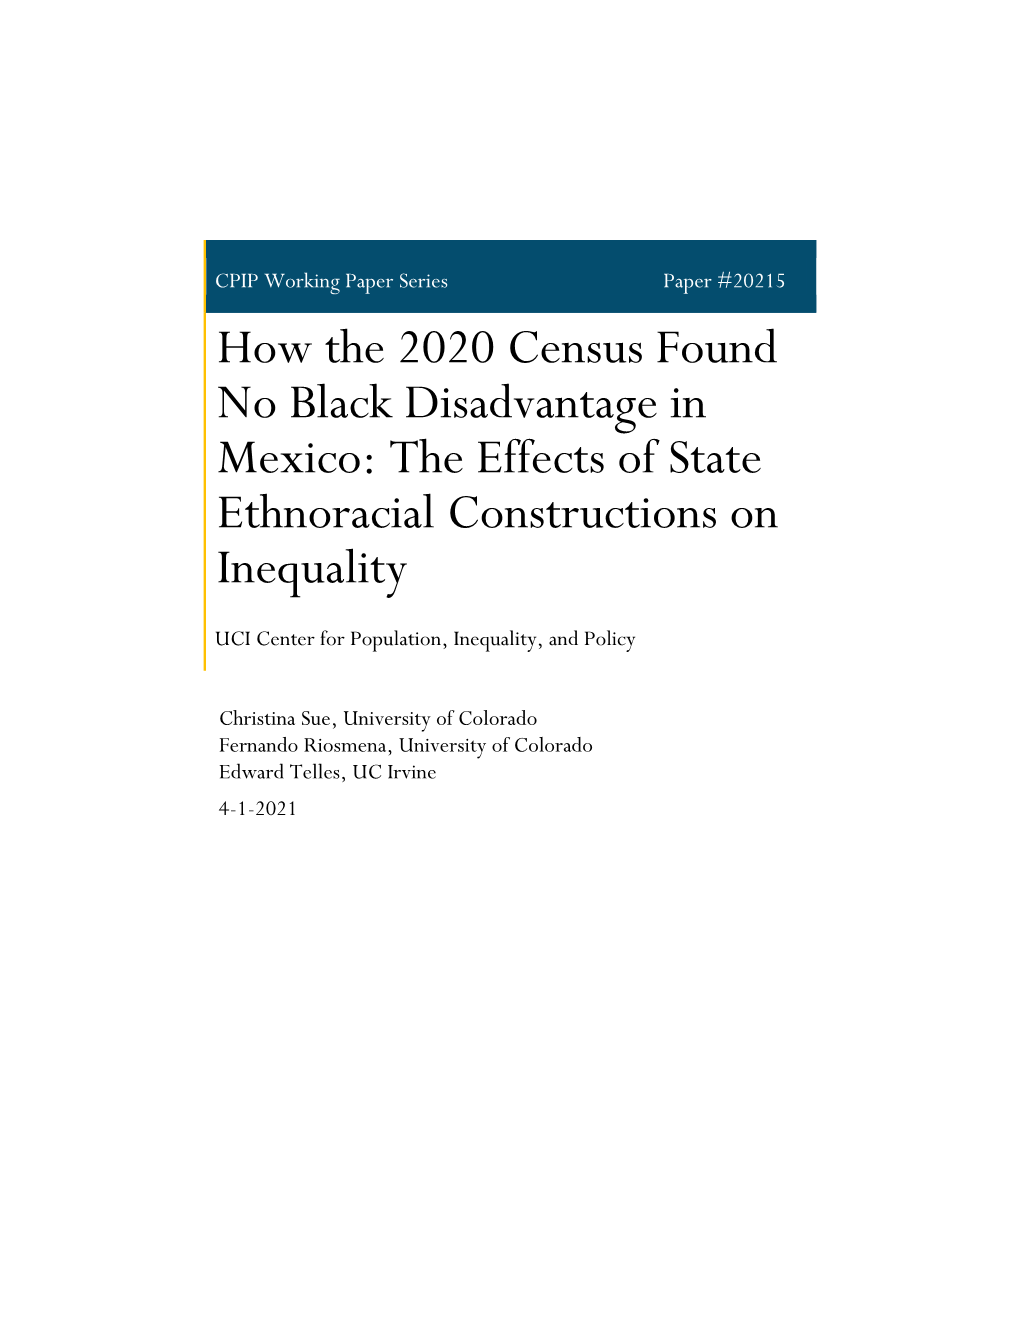 How the 2020 Census Found No Black Disadvantage in Mexico: the Effects of State Ethnoracial Constructions on Inequality